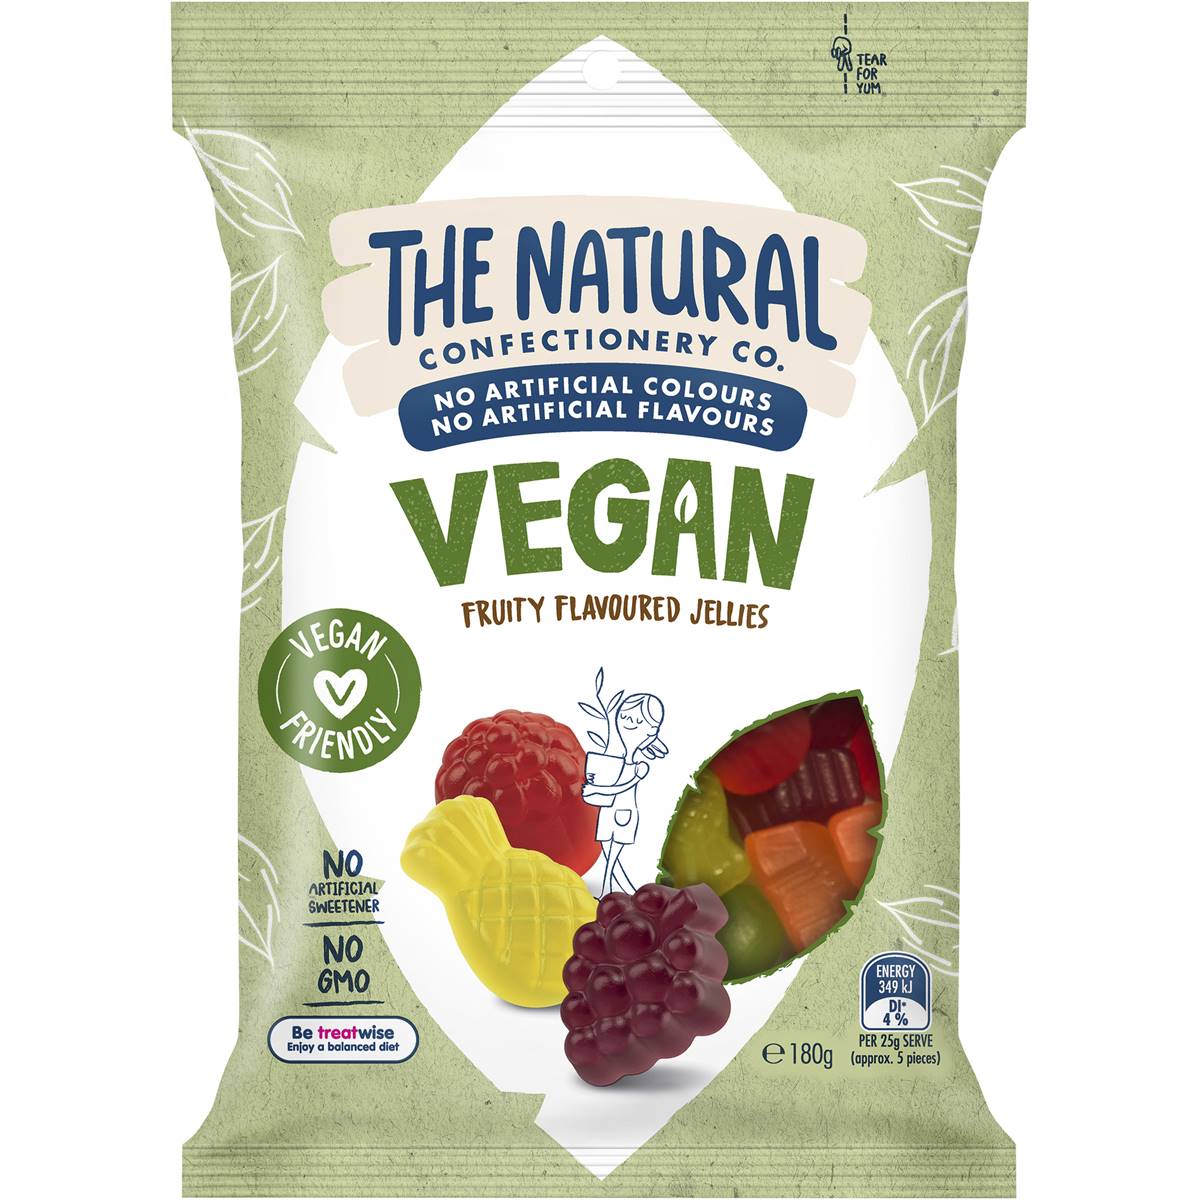 The Natural Confectionery Co. Vegan Fruity Flavoured Lollies 180g